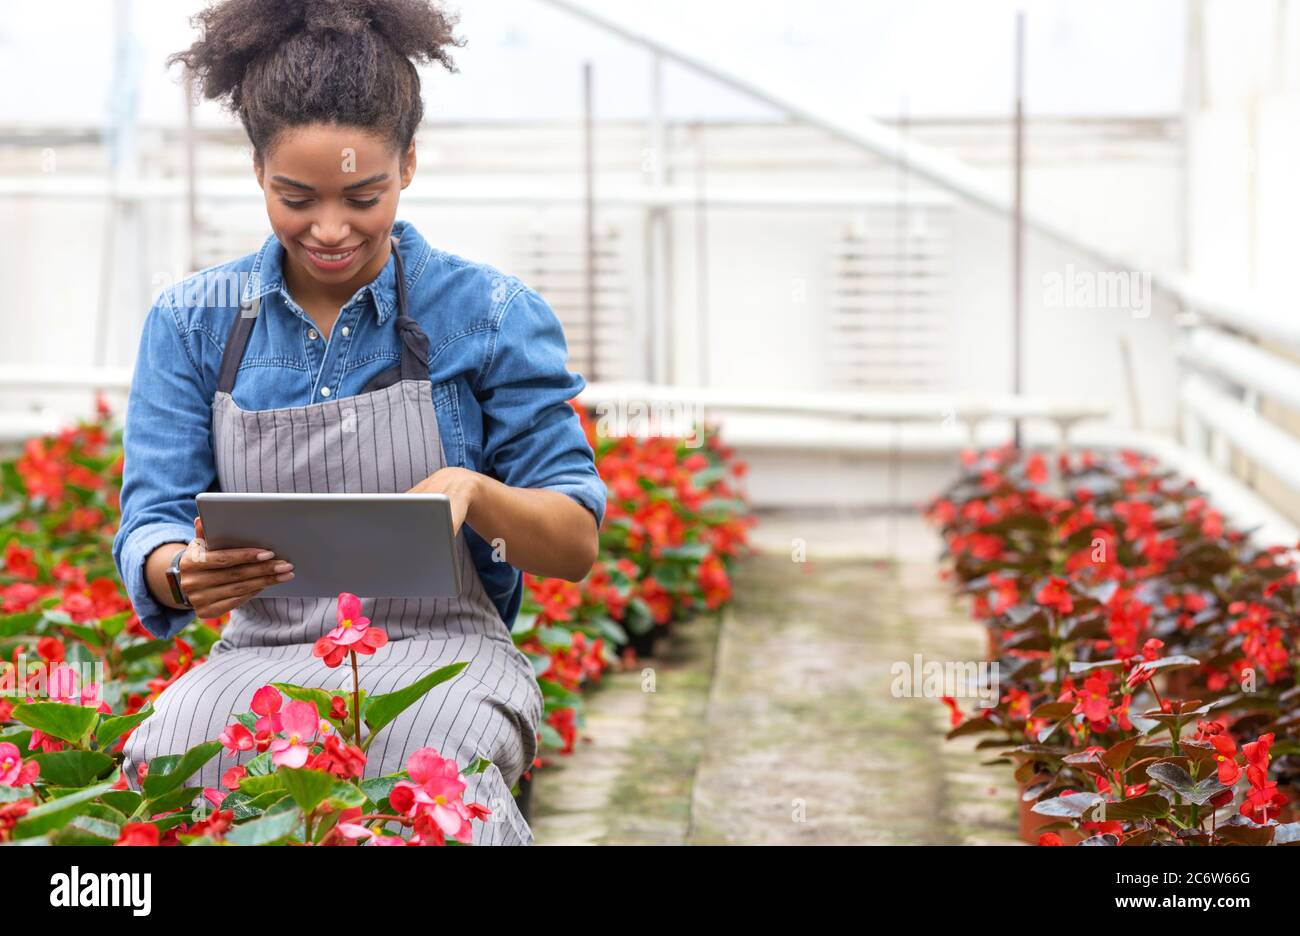 Climate control in greenhouse. Girl works with digital tablet on plantation Stock Photo